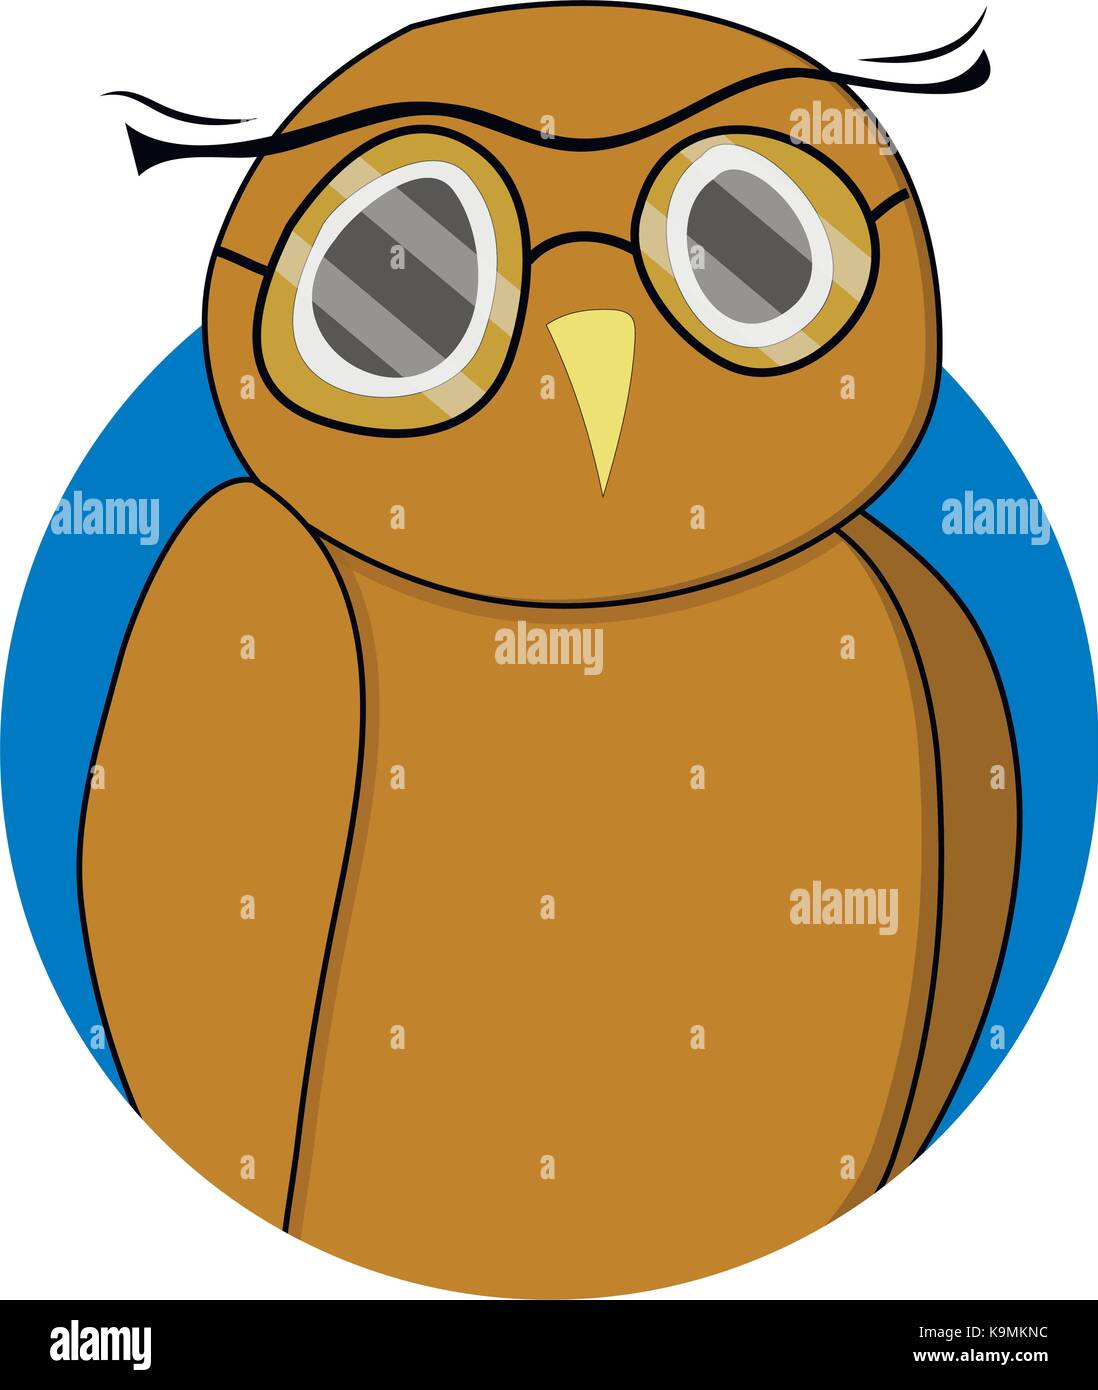 Wise owl sticker vector. Wisdom and cute owl, owl icon and owl teacher illustration Stock Vector